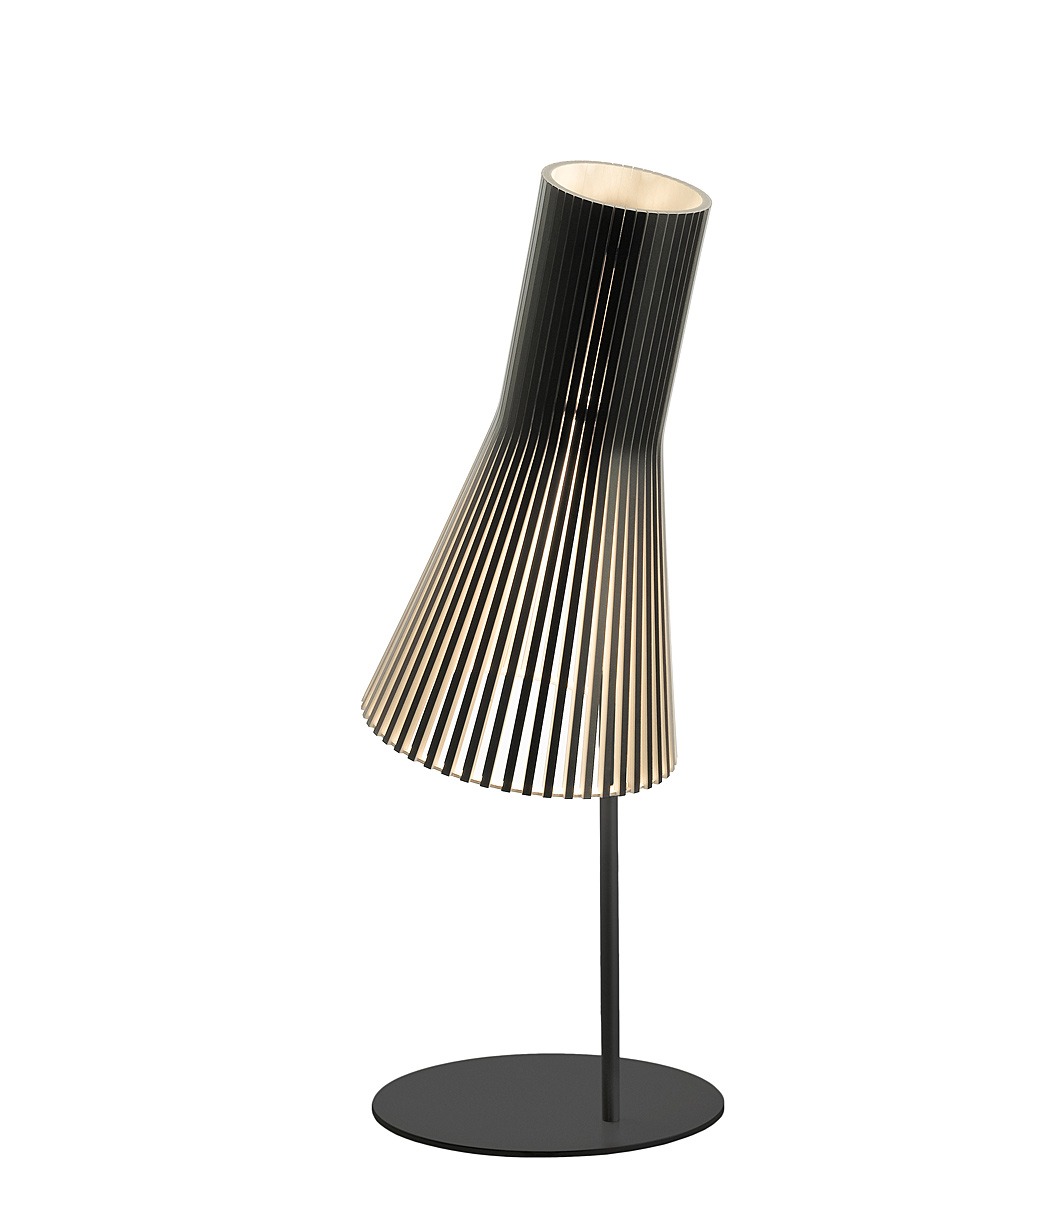 Secto 4220 table lamp is available in black laminated